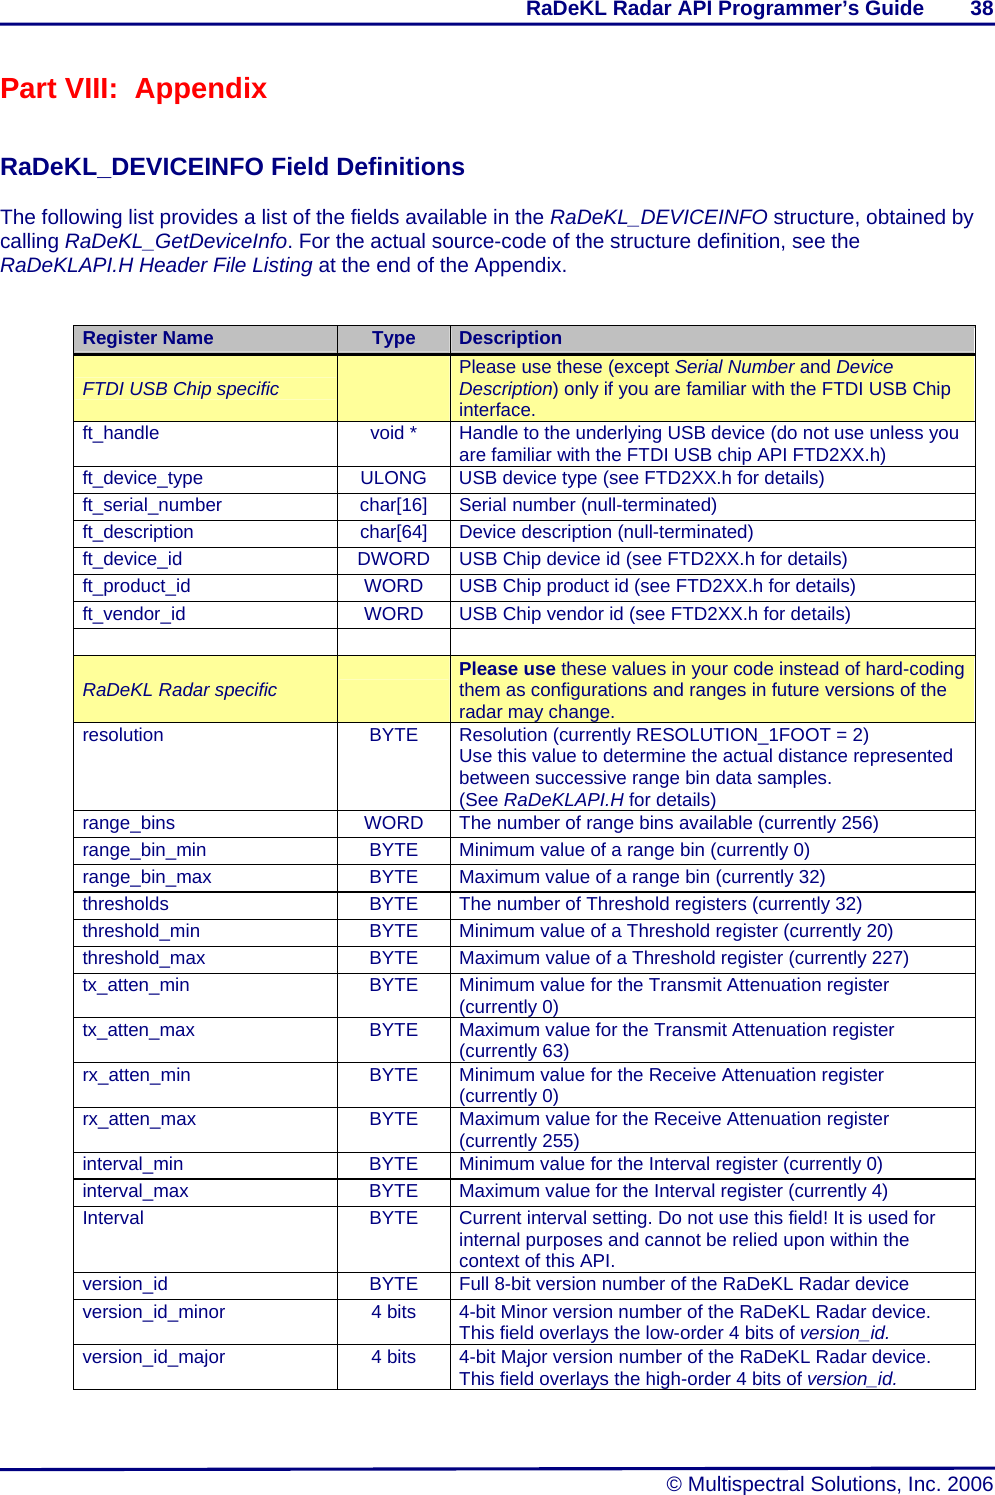 RaDeKL Radar API Programmer’s Guide        38   © Multispectral Solutions, Inc. 2006 Part VIII:  Appendix   RaDeKL_DEVICEINFO Field Definitions  The following list provides a list of the fields available in the RaDeKL_DEVICEINFO structure, obtained by calling RaDeKL_GetDeviceInfo. For the actual source-code of the structure definition, see the RaDeKLAPI.H Header File Listing at the end of the Appendix.   Register Name  Type  Description FTDI USB Chip specific   Please use these (except Serial Number and Device Description) only if you are familiar with the FTDI USB Chip interface. ft_handle  void *  Handle to the underlying USB device (do not use unless you are familiar with the FTDI USB chip API FTD2XX.h) ft_device_type  ULONG  USB device type (see FTD2XX.h for details) ft_serial_number char[16] Serial number (null-terminated) ft_description char[64] Device description (null-terminated) ft_device_id  DWORD  USB Chip device id (see FTD2XX.h for details) ft_product_id  WORD  USB Chip product id (see FTD2XX.h for details) ft_vendor_id  WORD  USB Chip vendor id (see FTD2XX.h for details)    RaDeKL Radar specific   Please use these values in your code instead of hard-coding them as configurations and ranges in future versions of the radar may change. resolution  BYTE  Resolution (currently RESOLUTION_1FOOT = 2) Use this value to determine the actual distance represented between successive range bin data samples. (See RaDeKLAPI.H for details) range_bins  WORD  The number of range bins available (currently 256) range_bin_min  BYTE  Minimum value of a range bin (currently 0) range_bin_max  BYTE  Maximum value of a range bin (currently 32) thresholds  BYTE  The number of Threshold registers (currently 32) threshold_min  BYTE  Minimum value of a Threshold register (currently 20) threshold_max  BYTE  Maximum value of a Threshold register (currently 227) tx_atten_min  BYTE  Minimum value for the Transmit Attenuation register (currently 0) tx_atten_max  BYTE  Maximum value for the Transmit Attenuation register (currently 63) rx_atten_min  BYTE  Minimum value for the Receive Attenuation register (currently 0) rx_atten_max  BYTE  Maximum value for the Receive Attenuation register (currently 255) interval_min BYTE Minimum value for the Interval register (currently 0) interval_max BYTE Maximum value for the Interval register (currently 4) Interval BYTE Current interval setting. Do not use this field! It is used for internal purposes and cannot be relied upon within the context of this API. version_id  BYTE  Full 8-bit version number of the RaDeKL Radar device version_id_minor  4 bits  4-bit Minor version number of the RaDeKL Radar device. This field overlays the low-order 4 bits of version_id. version_id_major  4 bits  4-bit Major version number of the RaDeKL Radar device.  This field overlays the high-order 4 bits of version_id. 